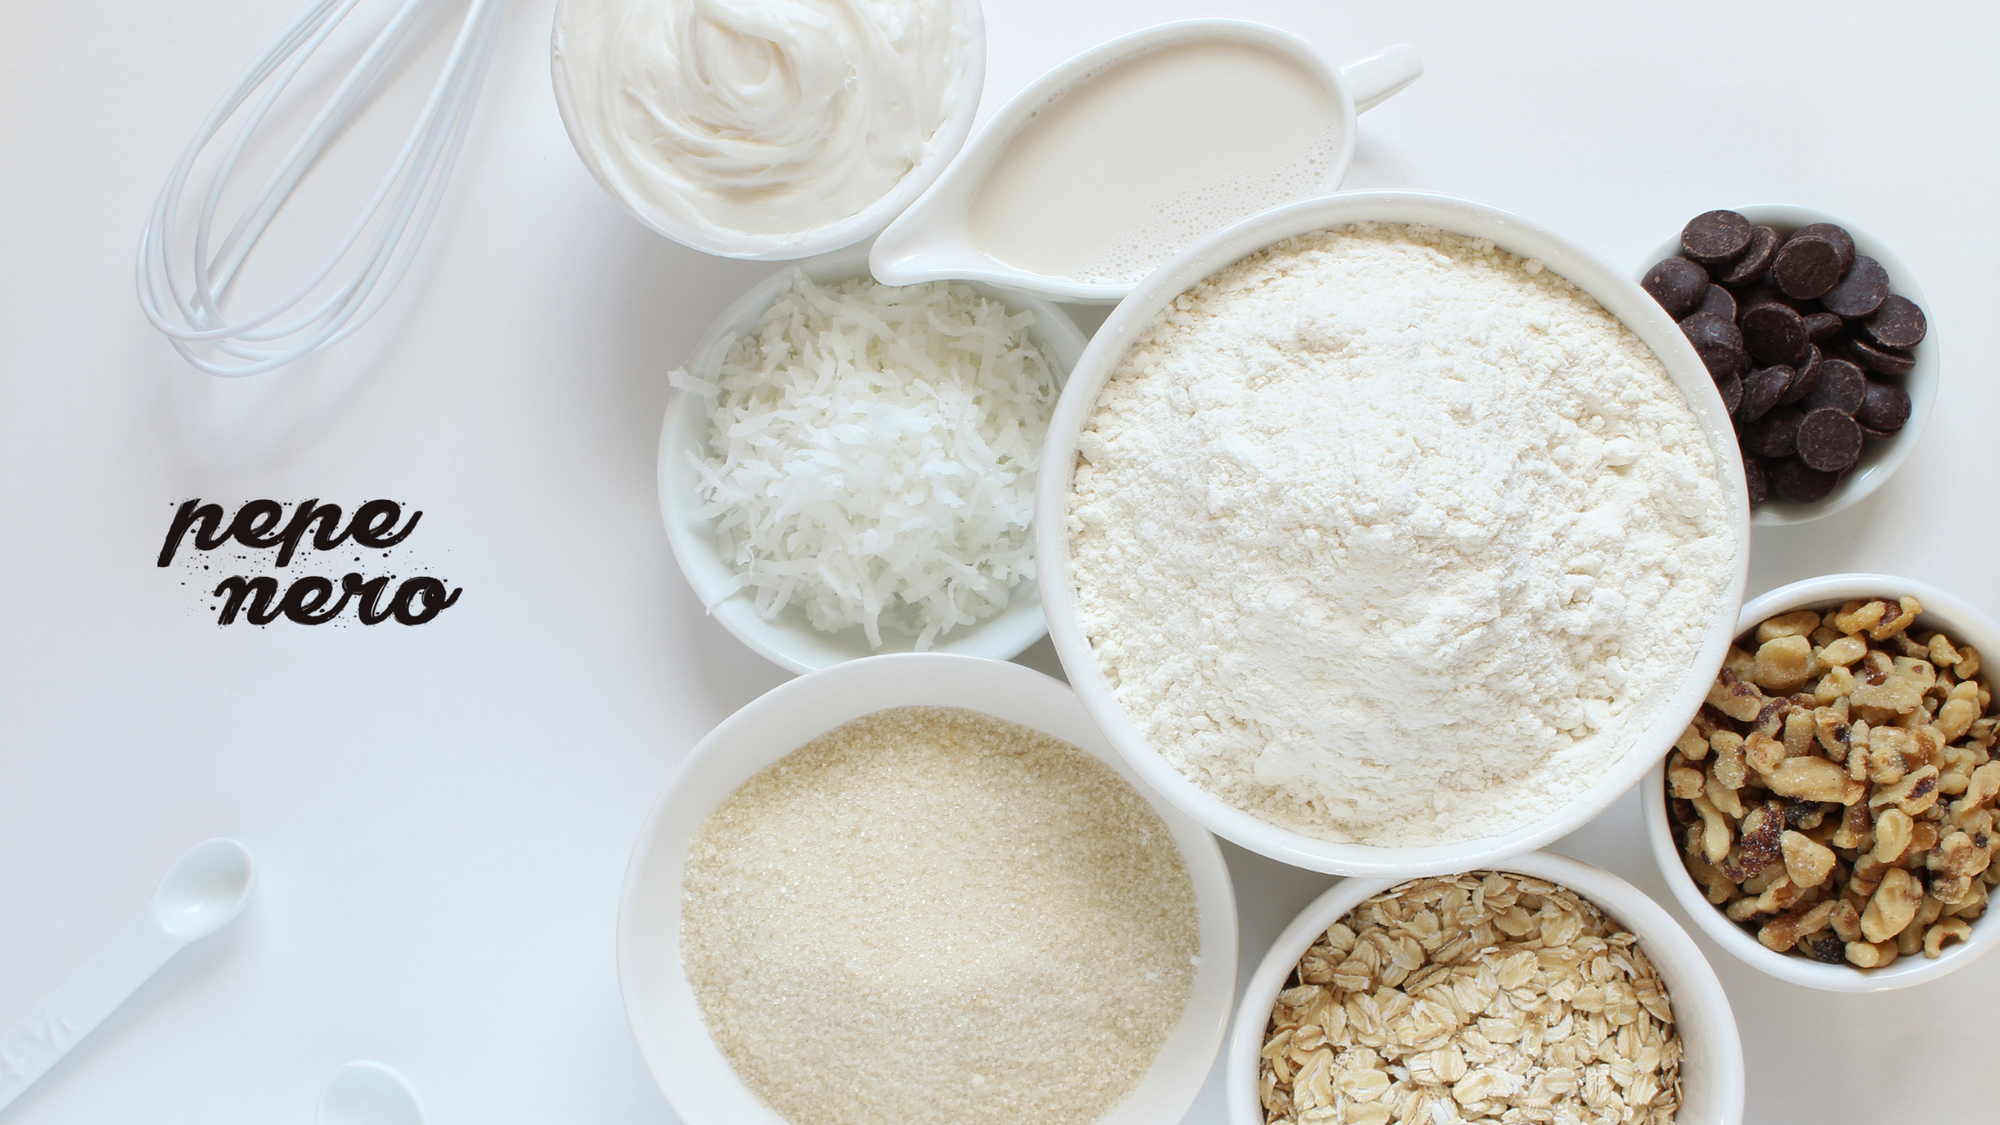 Every Baker Should Have These 14 Essential Baking Ingredients in Their Pantry